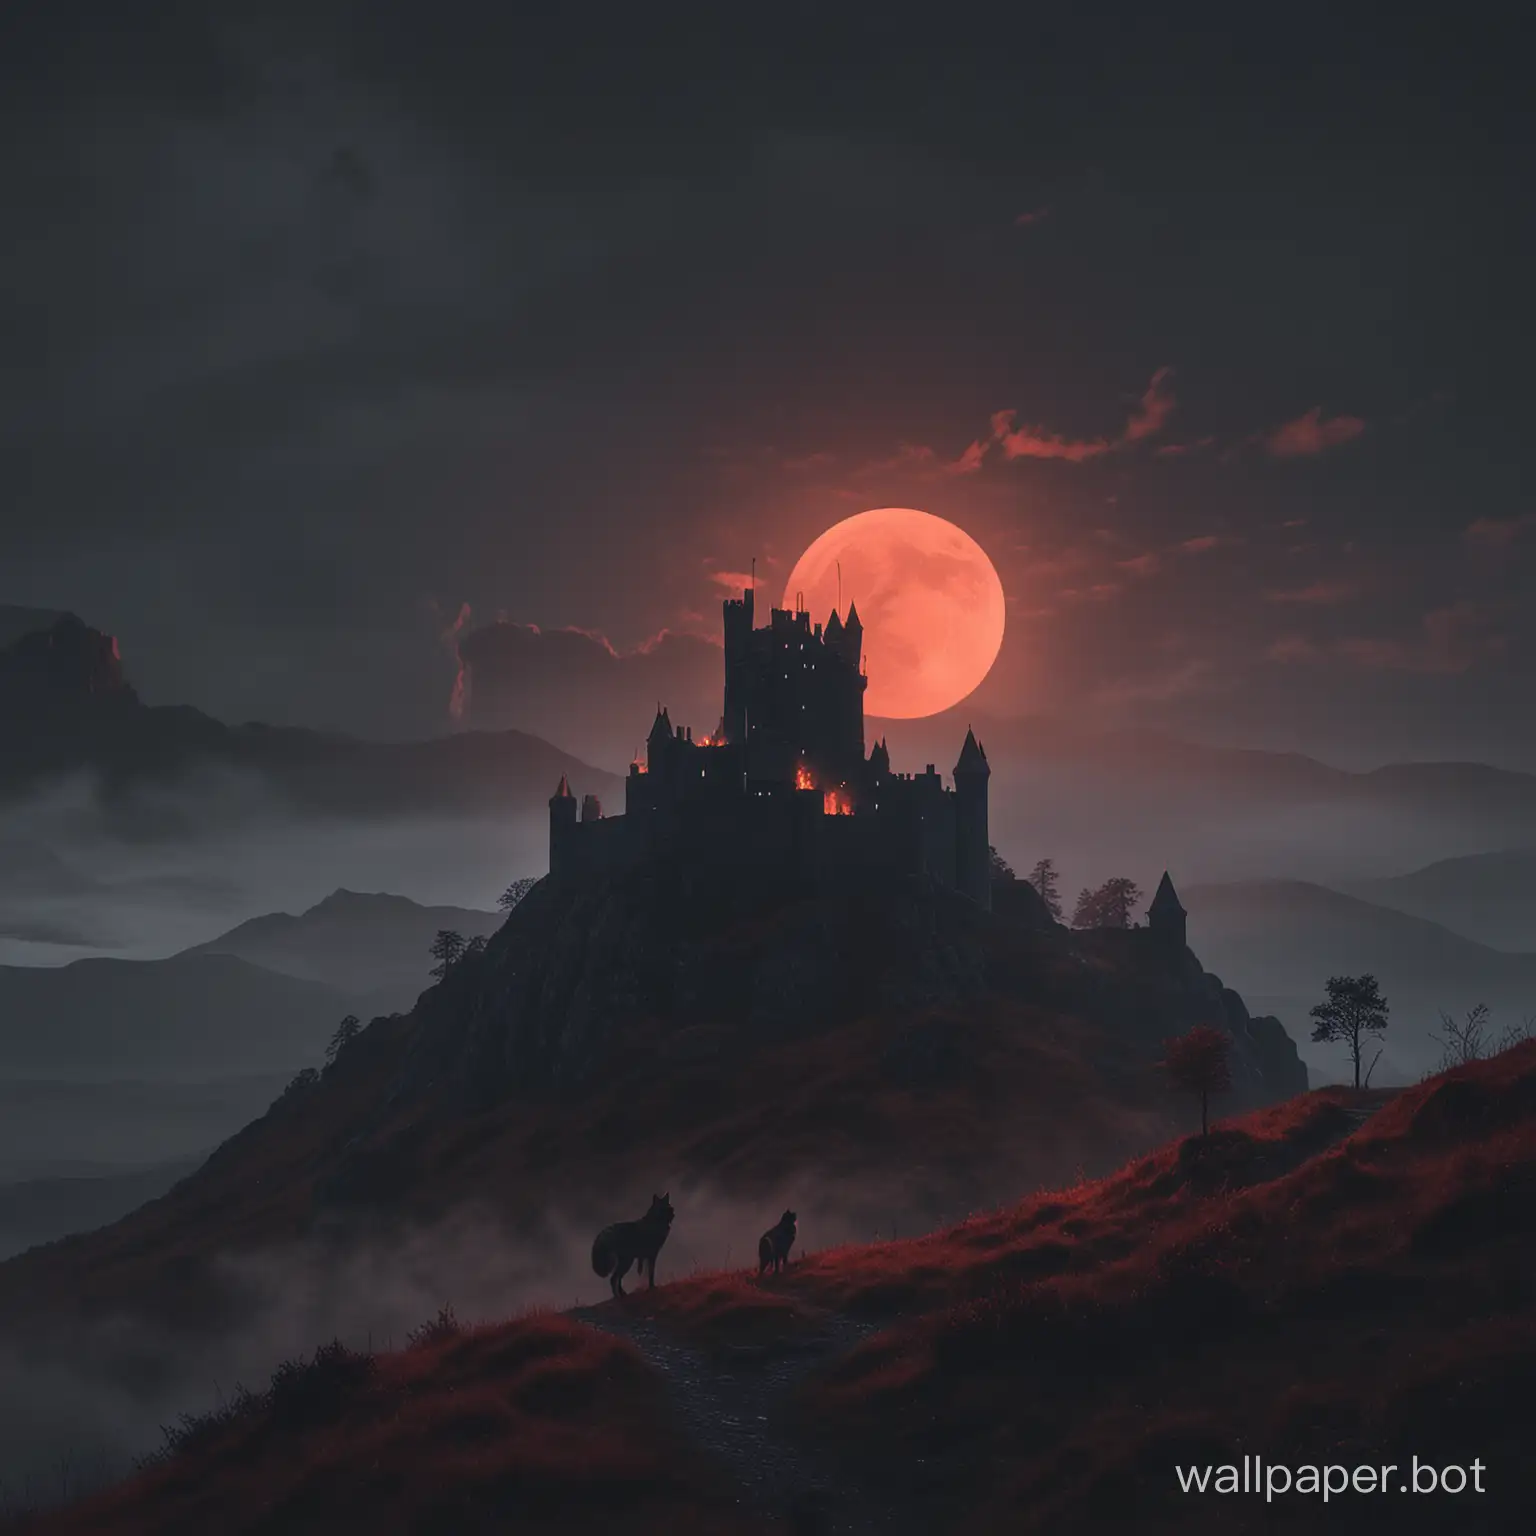 deep in the valleys of Ireland is a Wolf shaped Castle,torches with fire hanging from the walls,guiding travelers,very cold and eerie atmosphere,yuri schedoff style,background a full red moon hanging low between foggy hills,8k,cinematic,digitally exposure